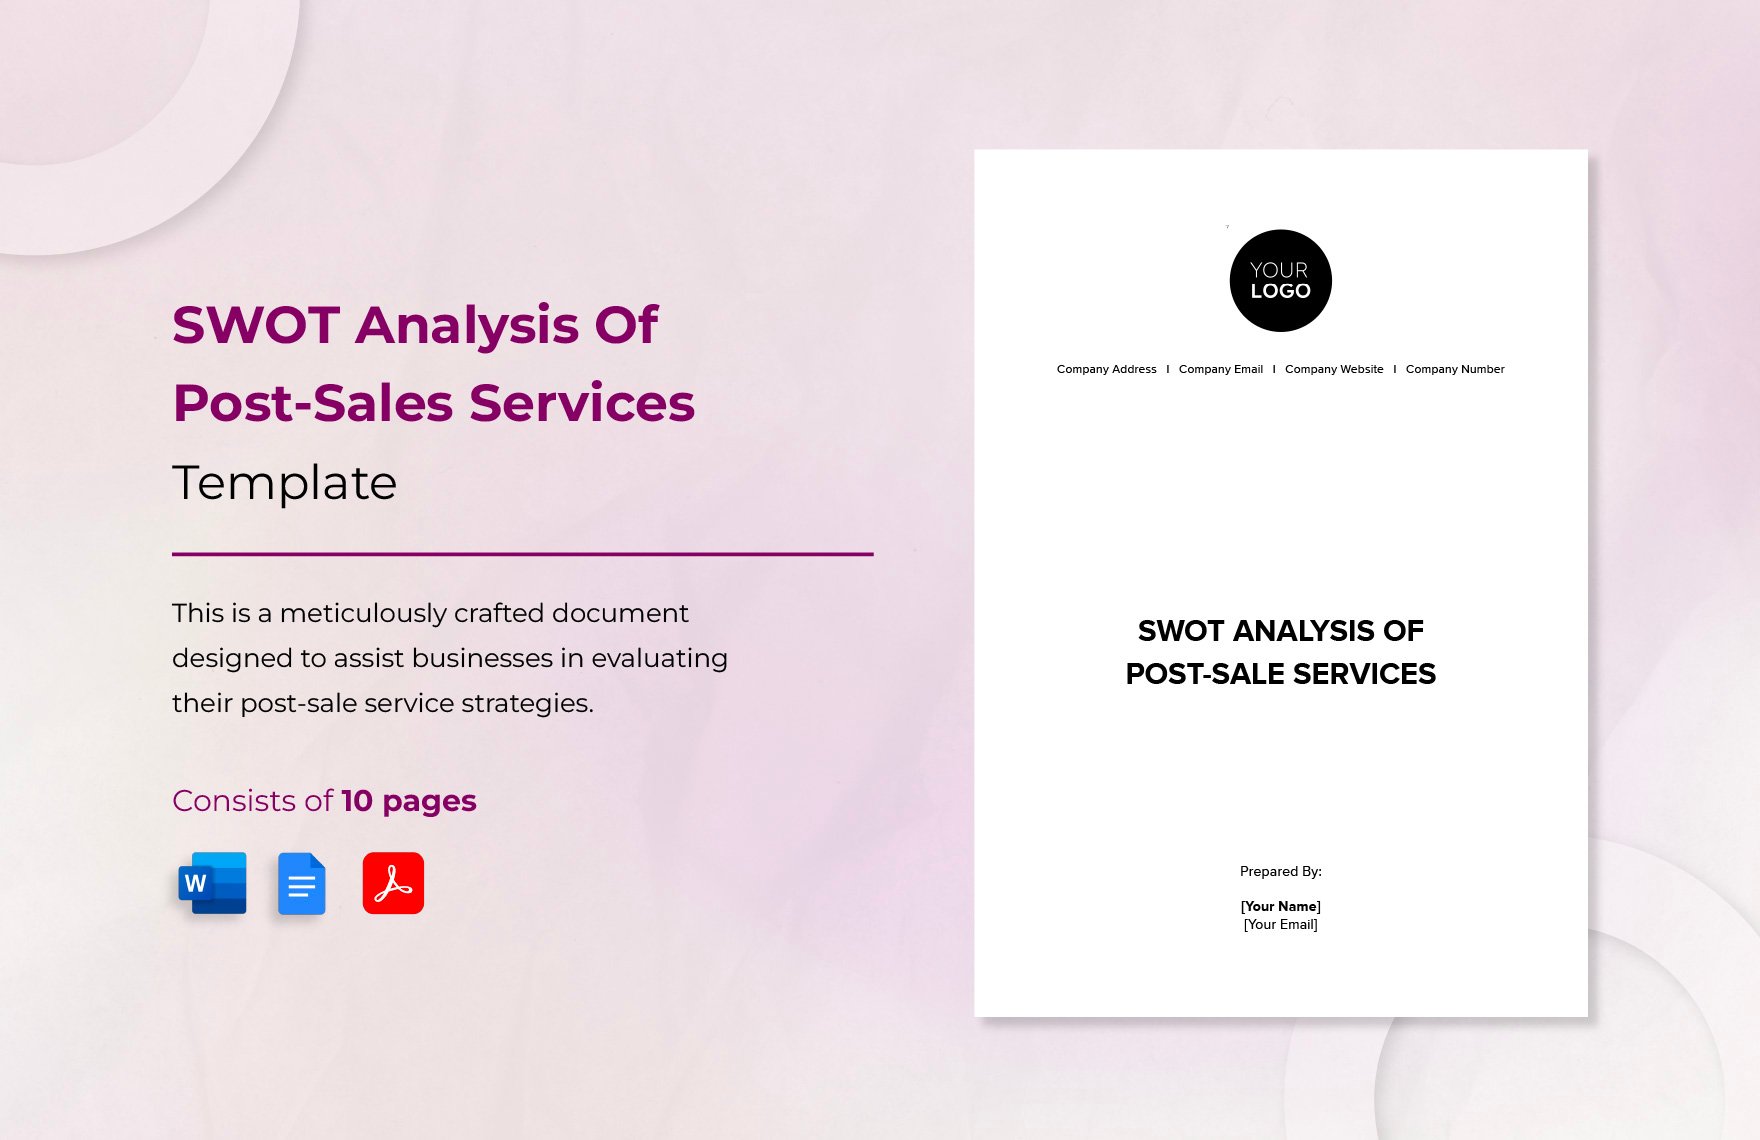 SWOT Analysis of Post-Sale Services Template